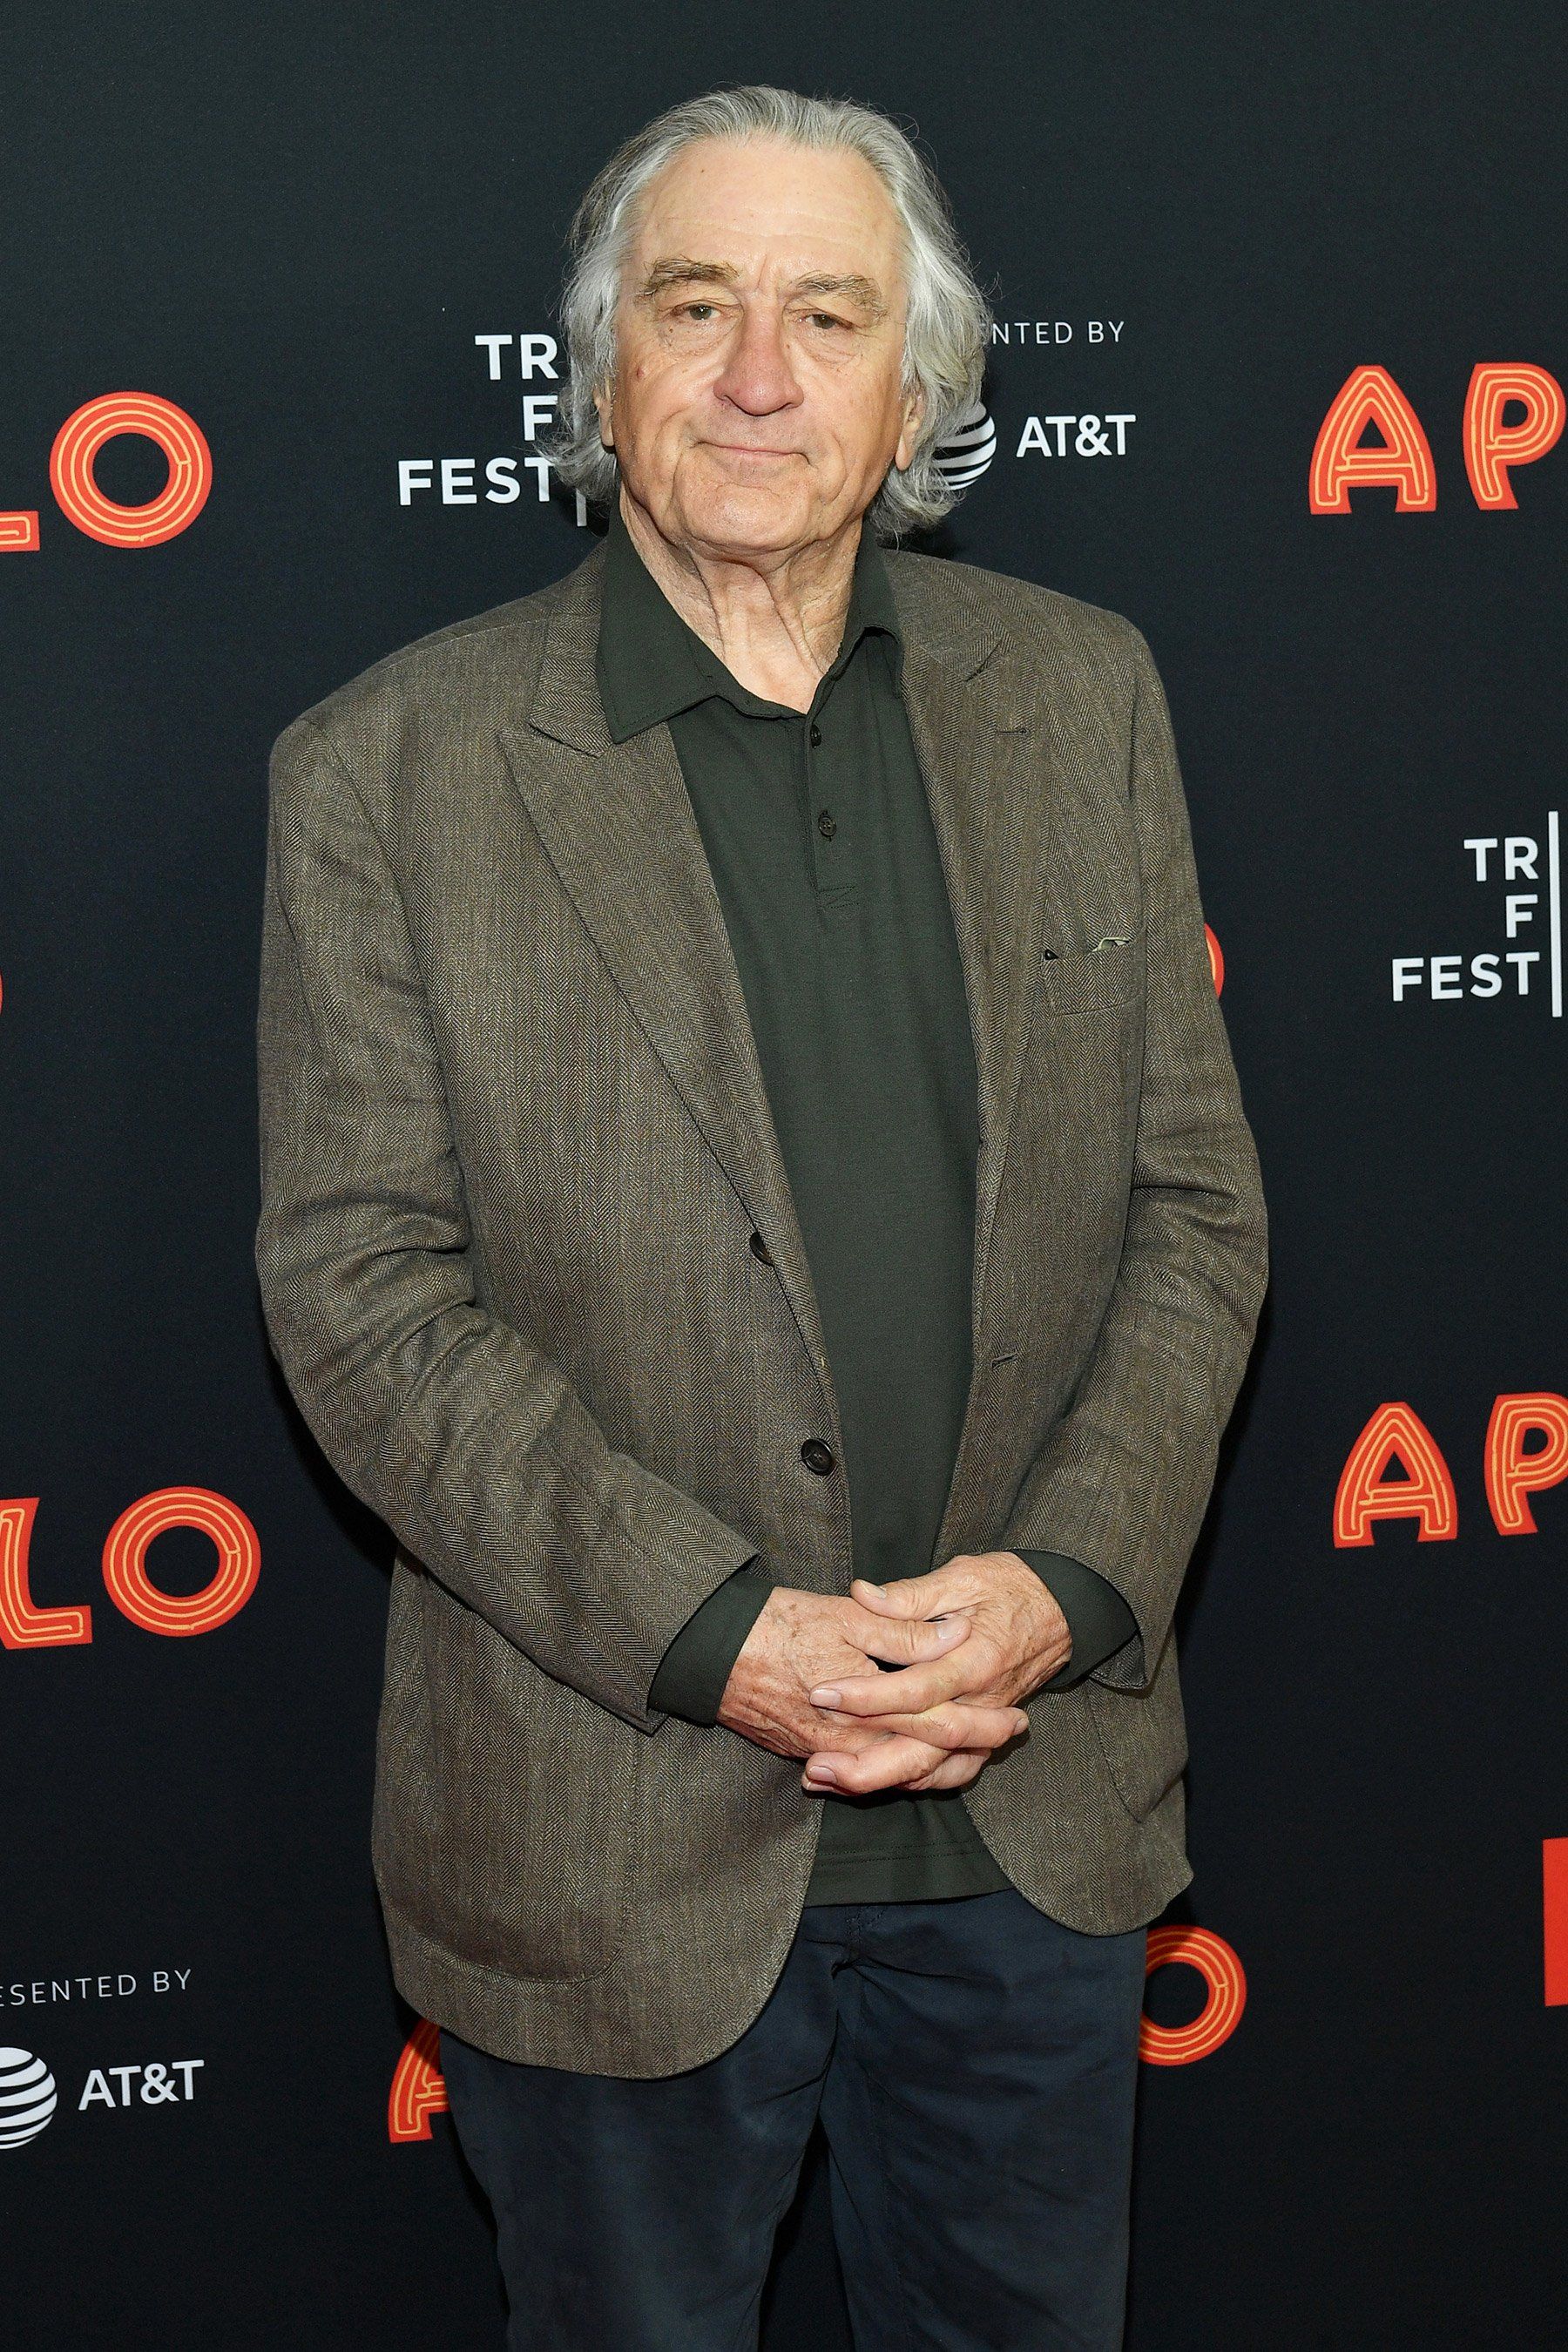 Robert De Niro's Company Sues Employee for $6 Million Who Allegedly Binged Friends at Work